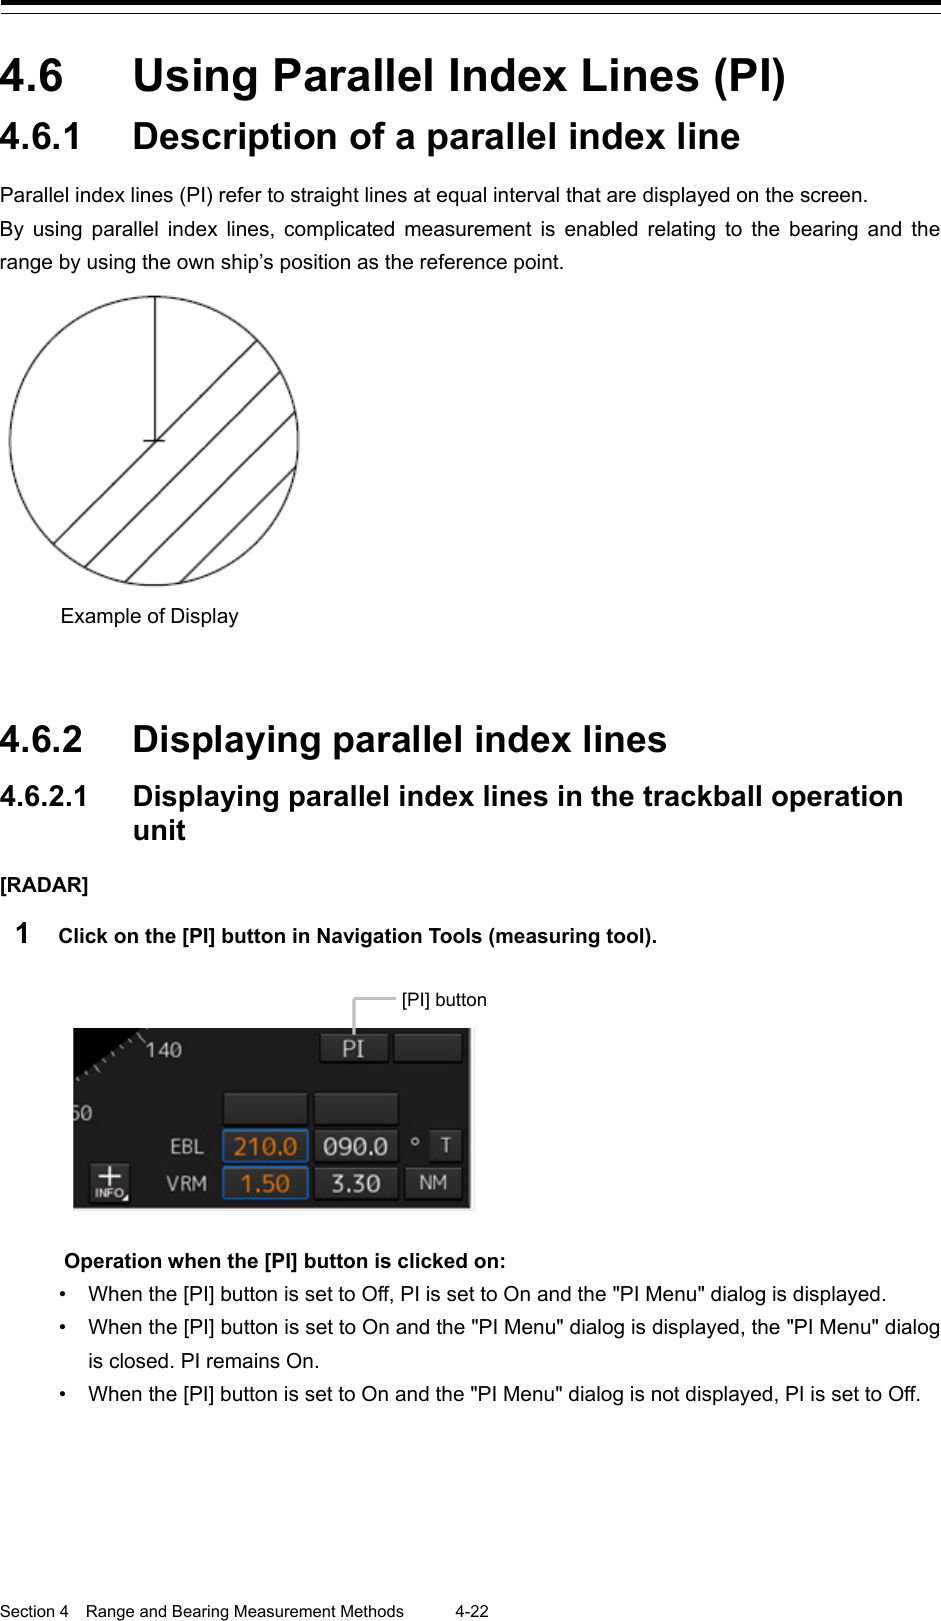  Section 4  Range and Bearing Measurement Methods 4-22  4.6  Using Parallel Index Lines (PI) 4.6.1 Description of a parallel index line Parallel index lines (PI) refer to straight lines at equal interval that are displayed on the screen. By using parallel index lines, complicated measurement is enabled relating to the bearing and the range by using the own ship’s position as the reference point.    4.6.2 Displaying parallel index lines 4.6.2.1 Displaying parallel index lines in the trackball operation unit [RADAR] 1  Click on the [PI] button in Navigation Tools (measuring tool).    Operation when the [PI] button is clicked on: • When the [PI] button is set to Off, PI is set to On and the &quot;PI Menu&quot; dialog is displayed. • When the [PI] button is set to On and the &quot;PI Menu&quot; dialog is displayed, the &quot;PI Menu&quot; dialog is closed. PI remains On. • When the [PI] button is set to On and the &quot;PI Menu&quot; dialog is not displayed, PI is set to Off.   Example of Display  [PI] button 